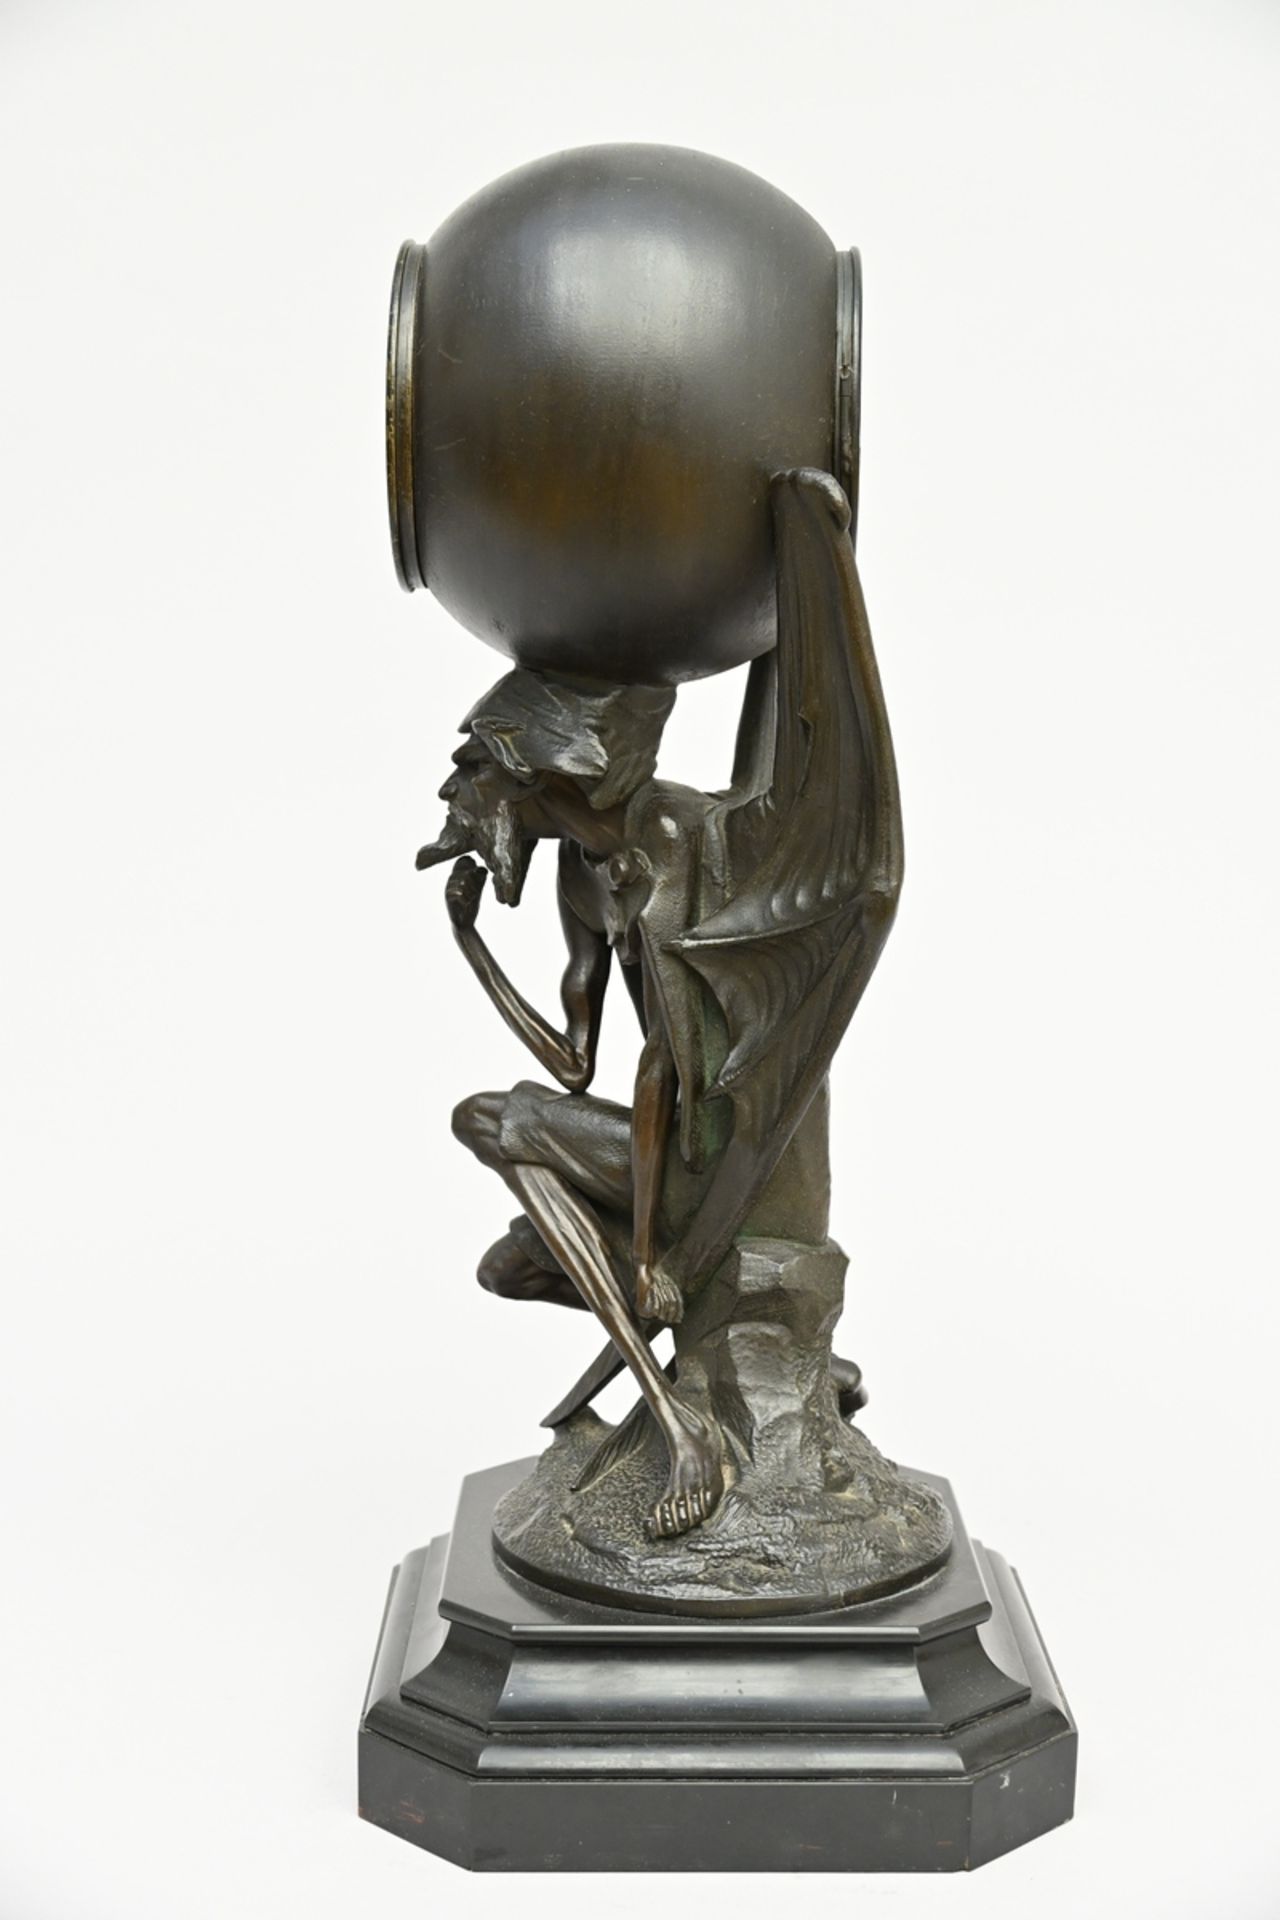 Clock in zamack 'devil' by Lemaire, 19th century (h56cm) (*) - Image 2 of 6